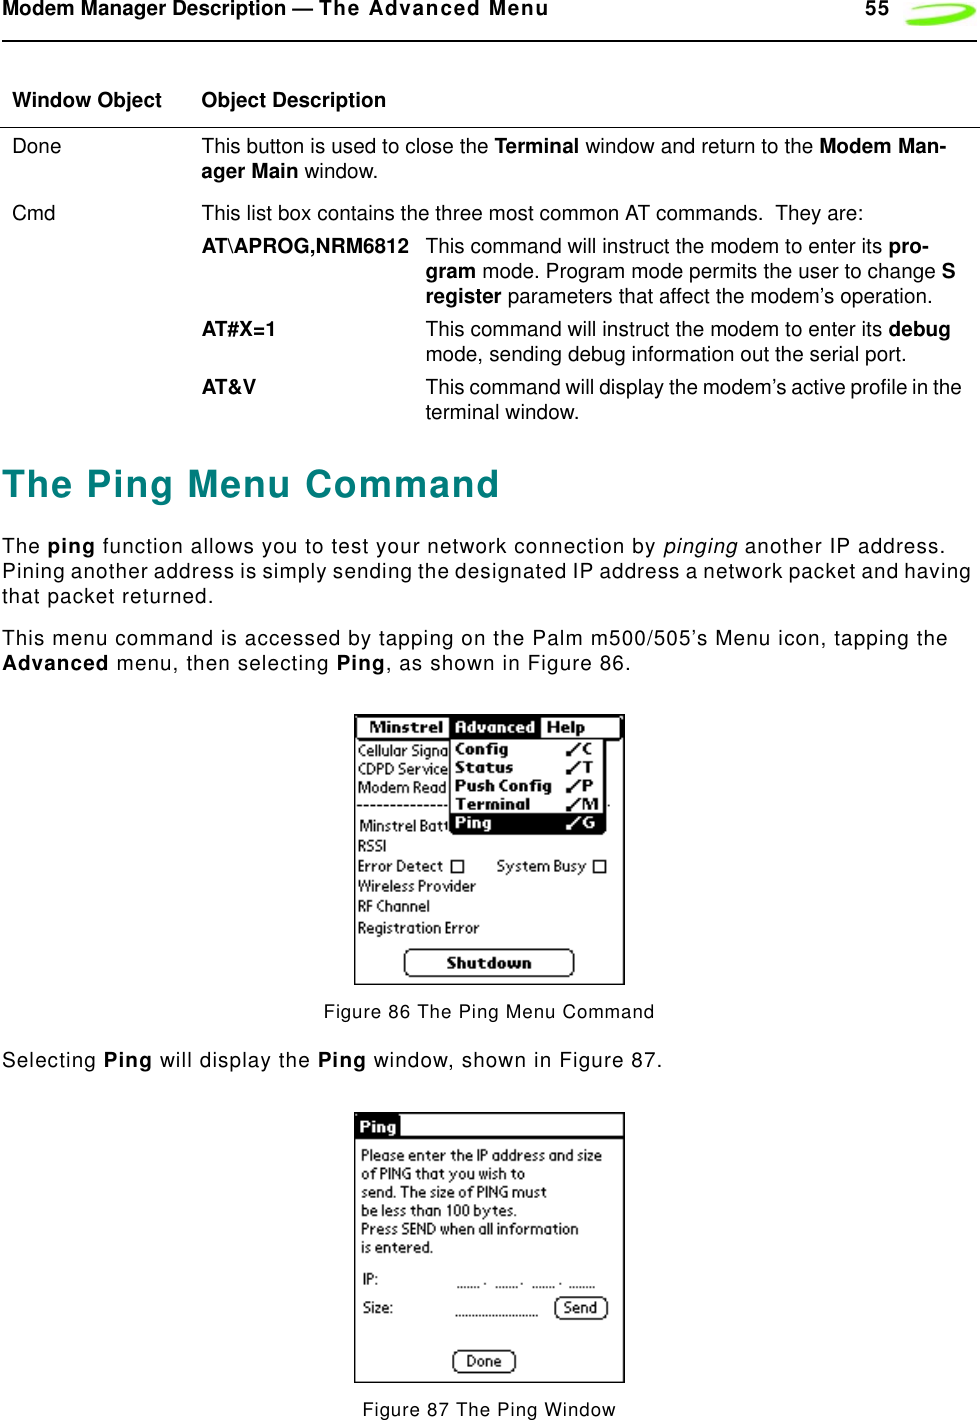 Modem Manager Description — The Advanced Menu 55The Ping Menu CommandThe ping function allows you to test your network connection by pinging another IP address. Pining another address is simply sending the designated IP address a network packet and having that packet returned.This menu command is accessed by tapping on the Palm m500/505’s Menu icon, tapping the Advanced menu, then selecting Ping, as shown in Figure 86.Figure 86 The Ping Menu CommandSelecting Ping will display the Ping window, shown in Figure 87.Figure 87 The Ping WindowDone This button is used to close the Terminal window and return to the Modem Man-ager Main window.Cmd This list box contains the three most common AT commands.  They are:AT\APROG,NRM6812 This command will instruct the modem to enter its pro-gram mode. Program mode permits the user to change S register parameters that affect the modem’s operation.AT#X=1 This command will instruct the modem to enter its debug mode, sending debug information out the serial port.AT&amp;V This command will display the modem’s active profile in the terminal window.Window Object Object Description